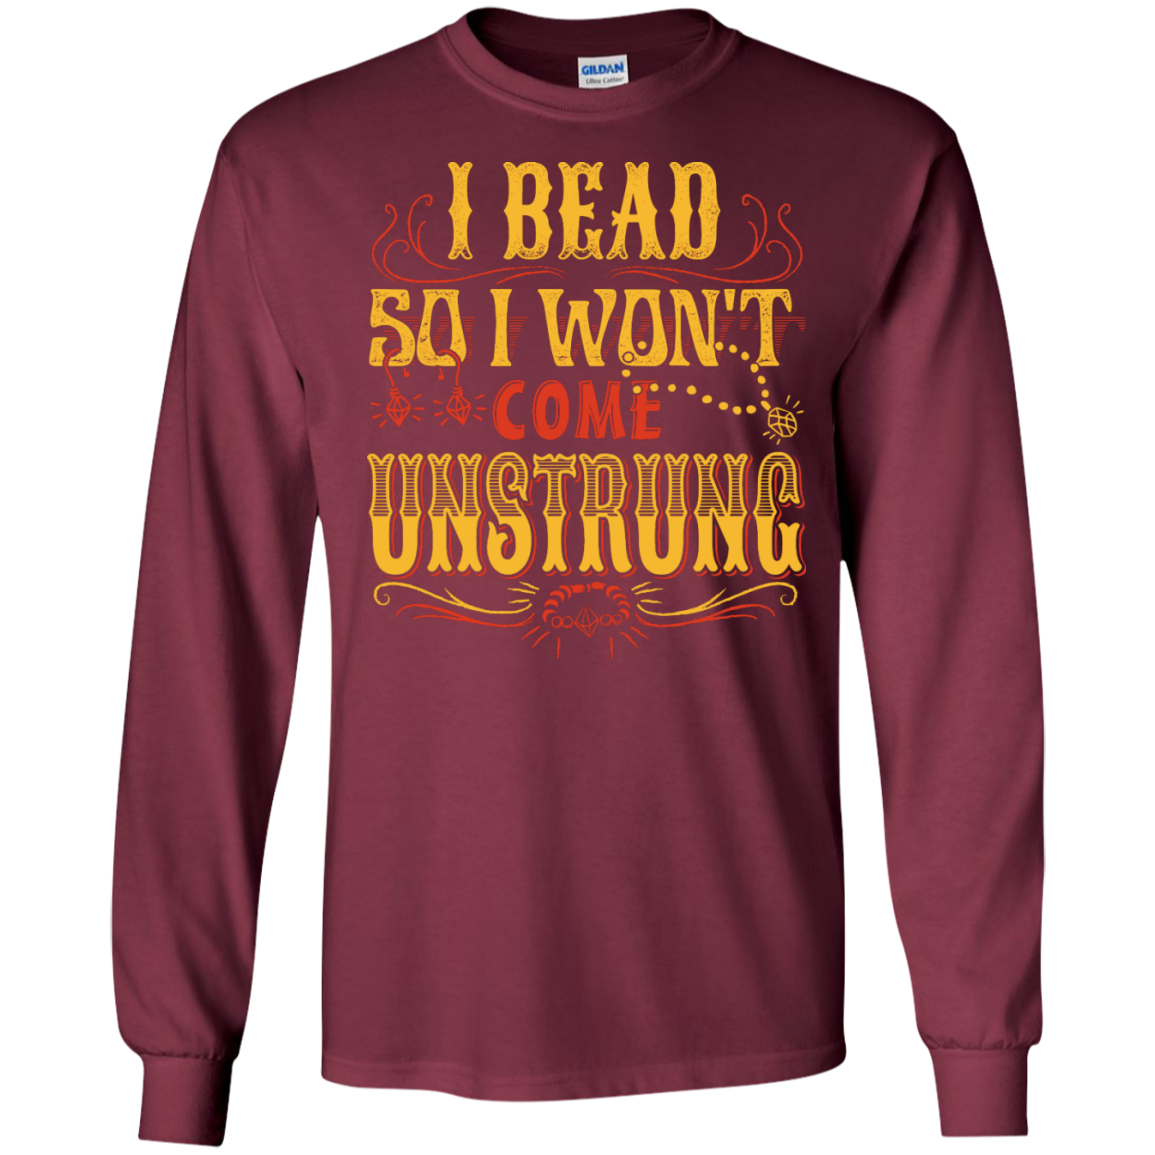 I Bead So I Won't Come Unstrung (gold) Long Sleeve Ultra Cotton T-Shirt - Crafter4Life - 4